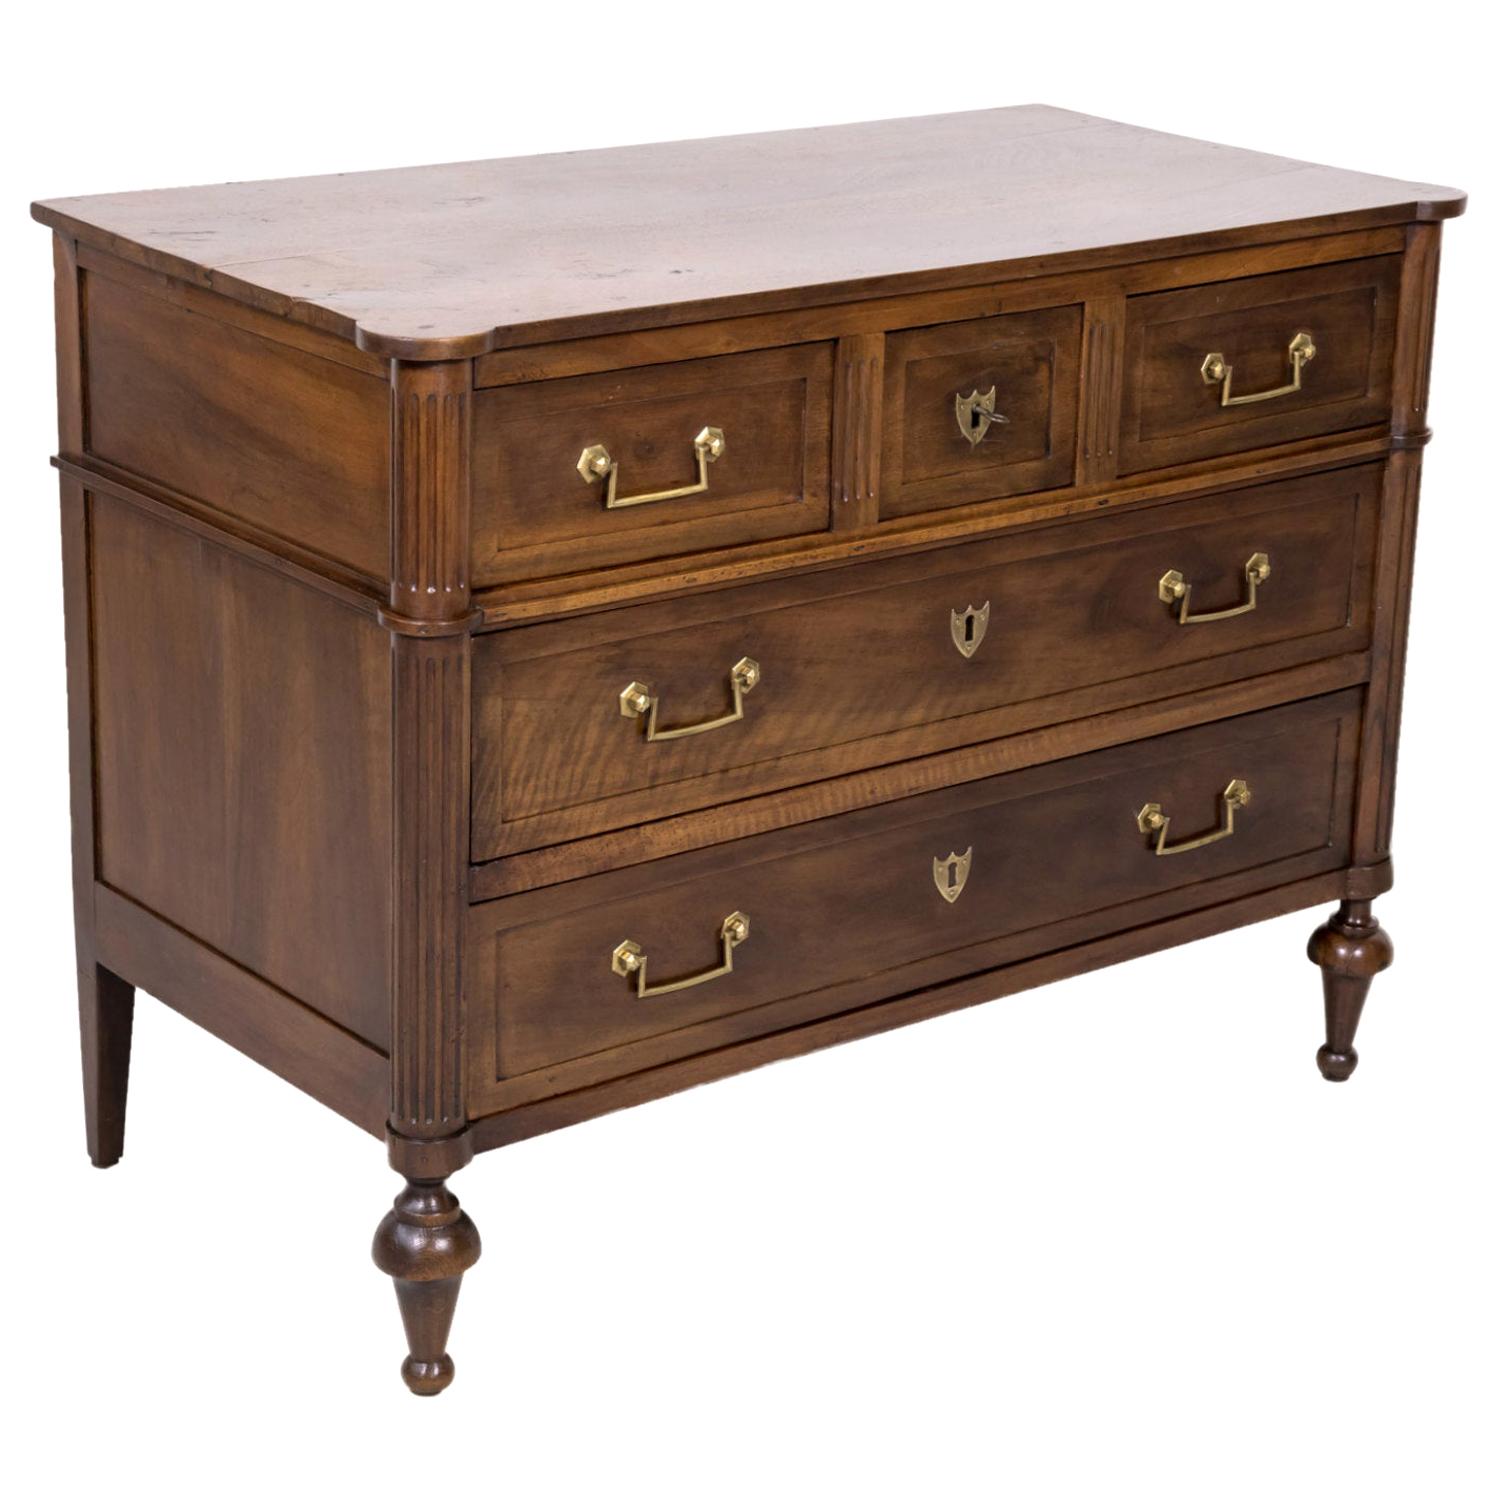 19th Century French Louis XVI Style Walnut Commode or Chest of Drawers